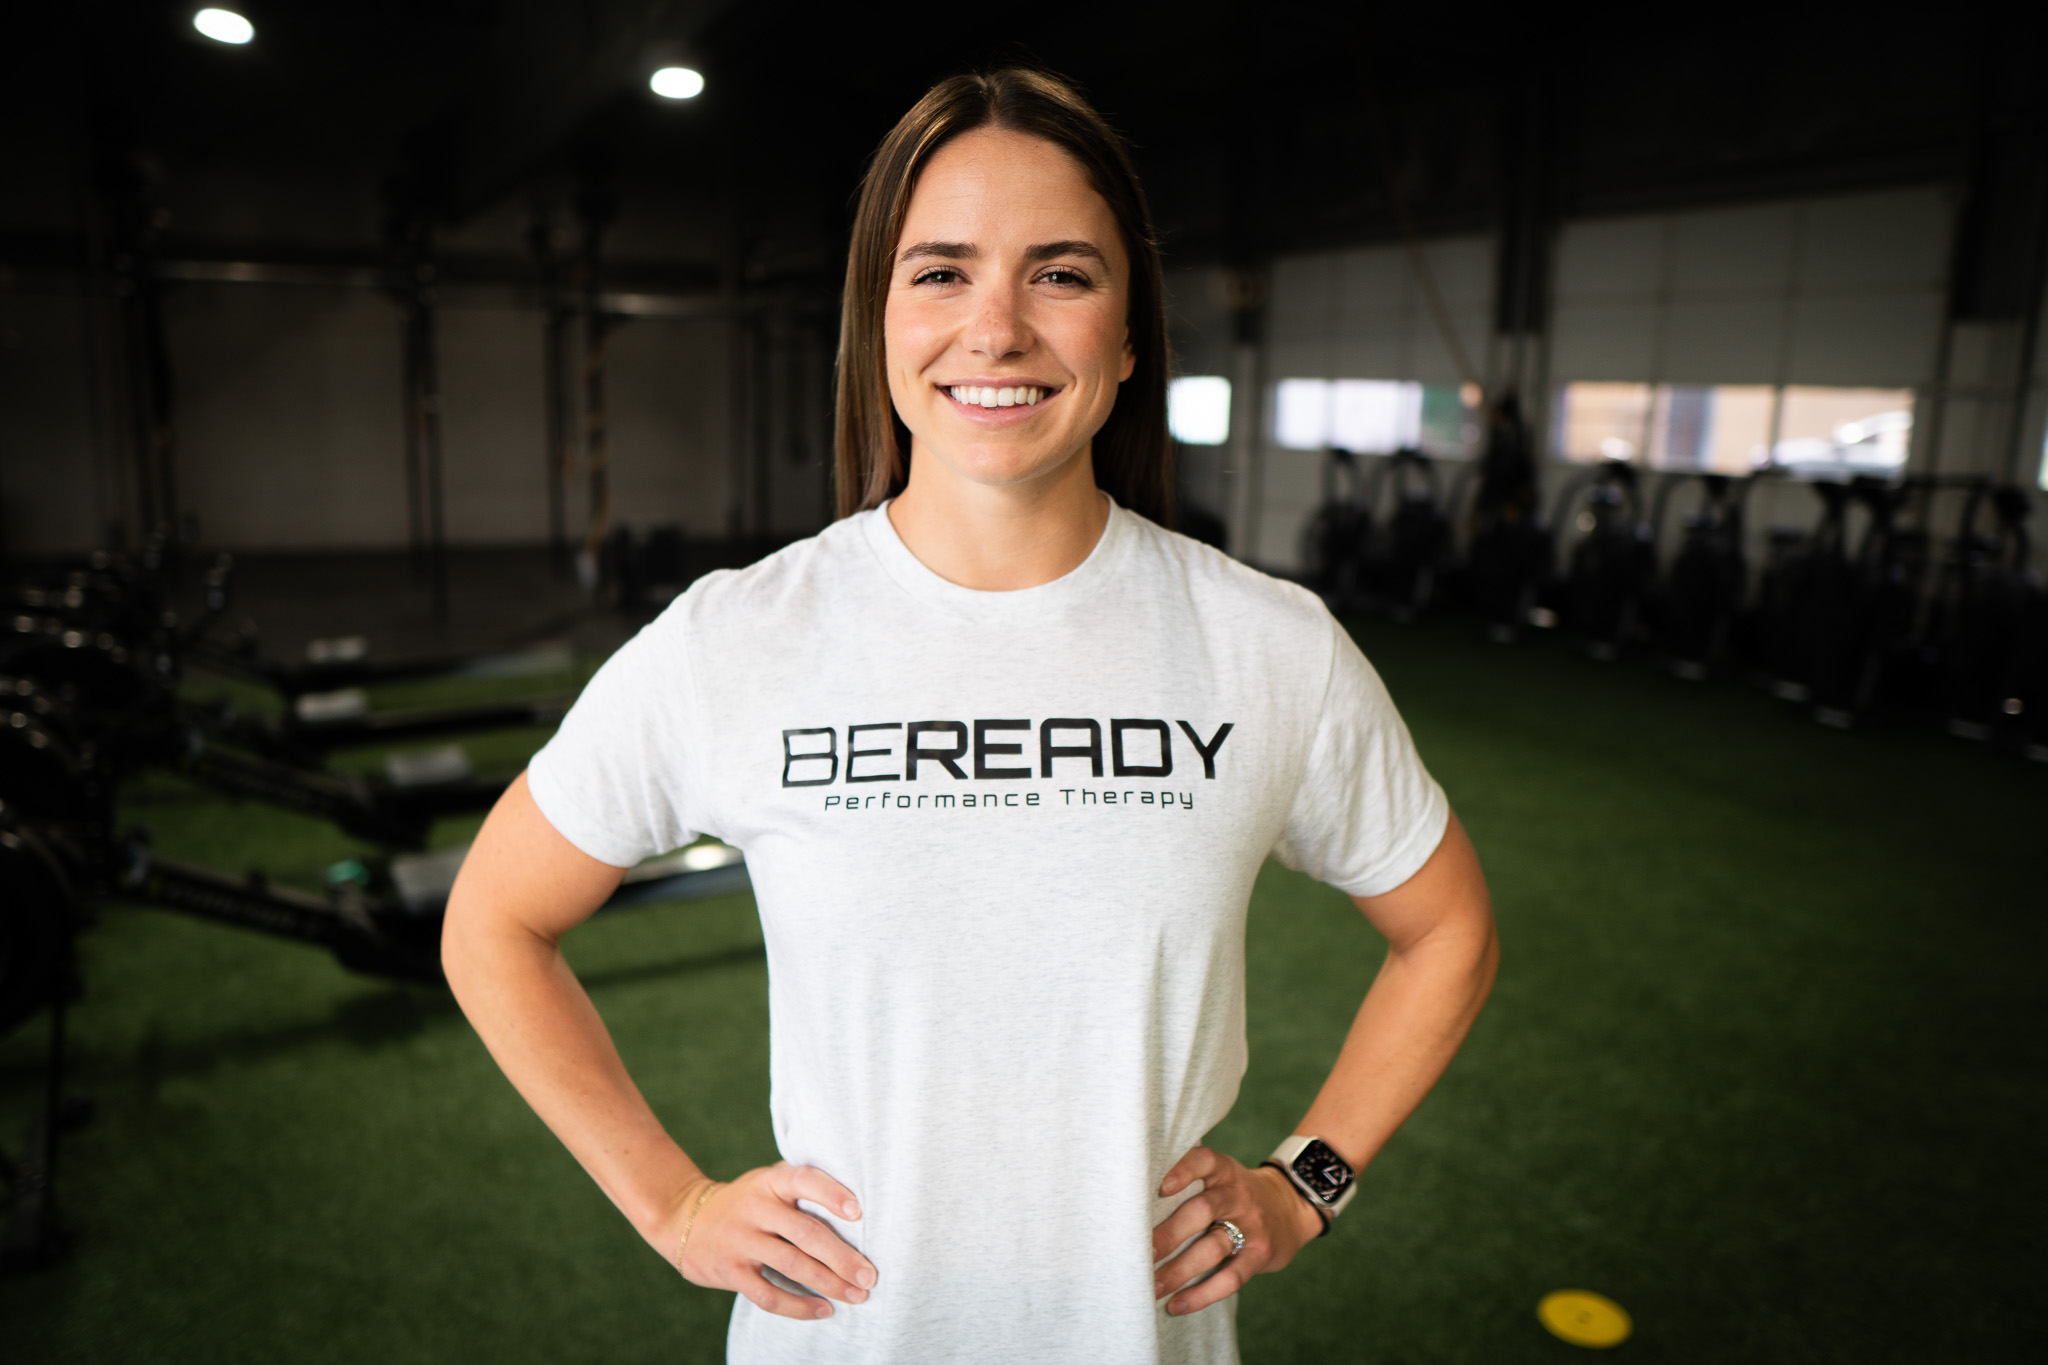 A smiling woman in a t-shirt with "beready performance therapy" printed on it, standing in a gym with exercise equipment in the background.